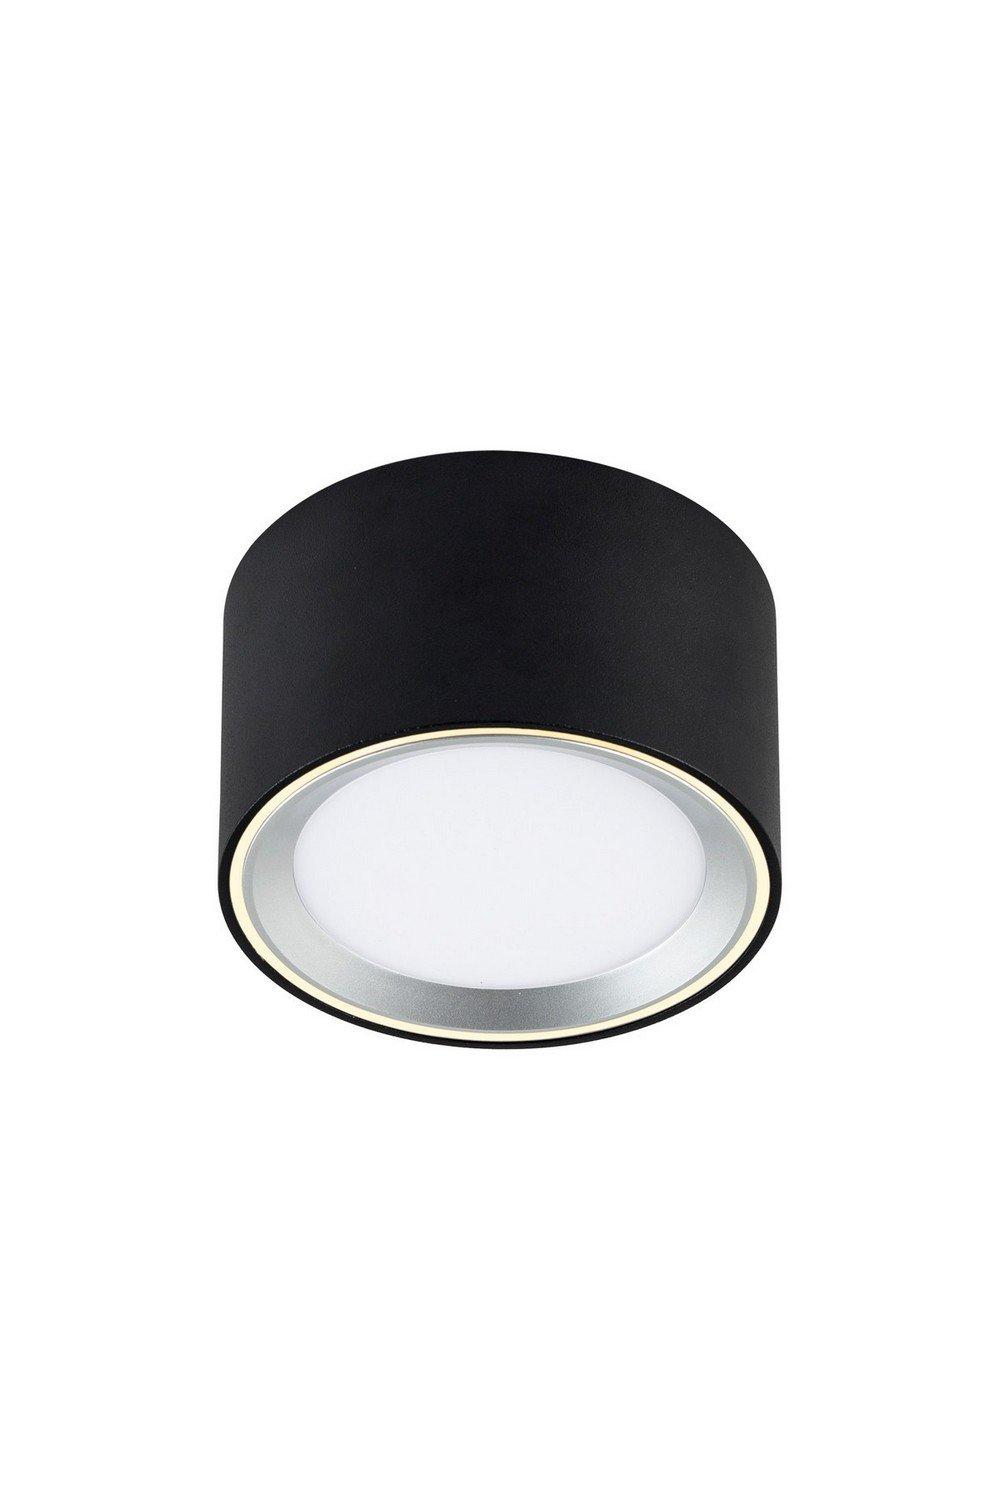 Fallon LED Dimmable Surface Mounted Downlight Black 2700K